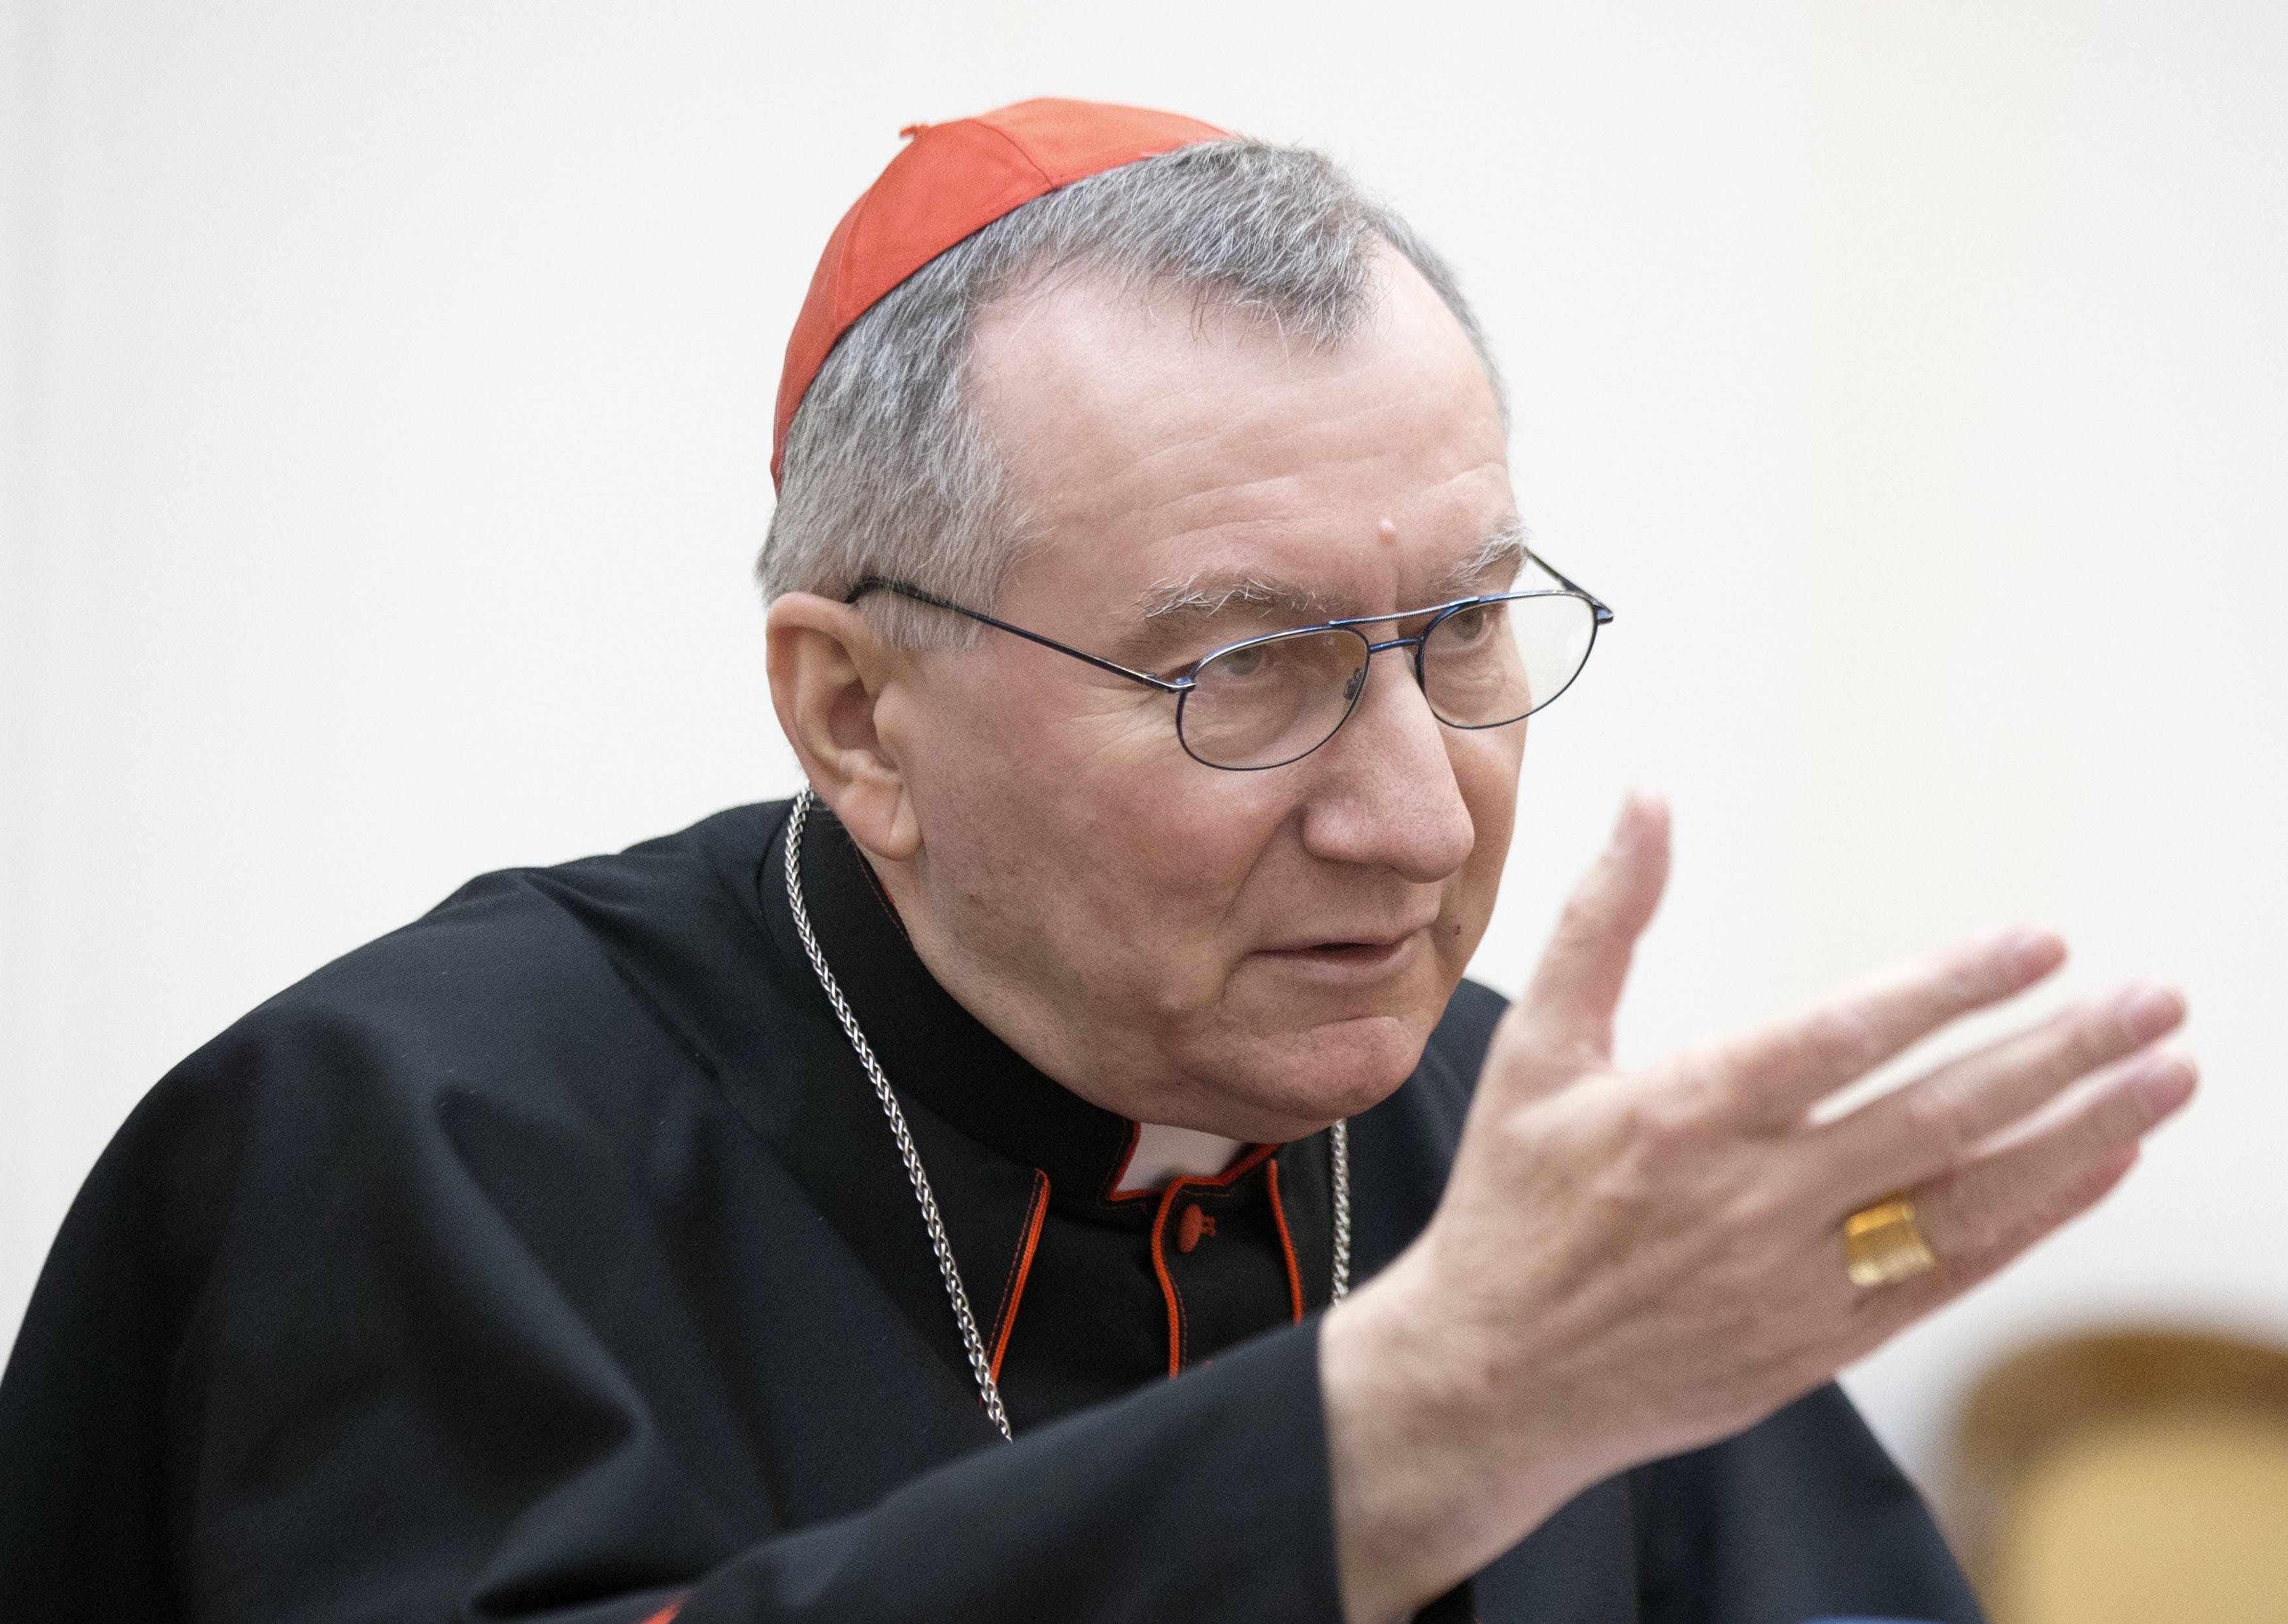 Cardinal Pietro Parolin, the Vatican's Secretary of State, speaks during his official visit with Belarussian Foreign Minister Vladimir Makei in Minsk